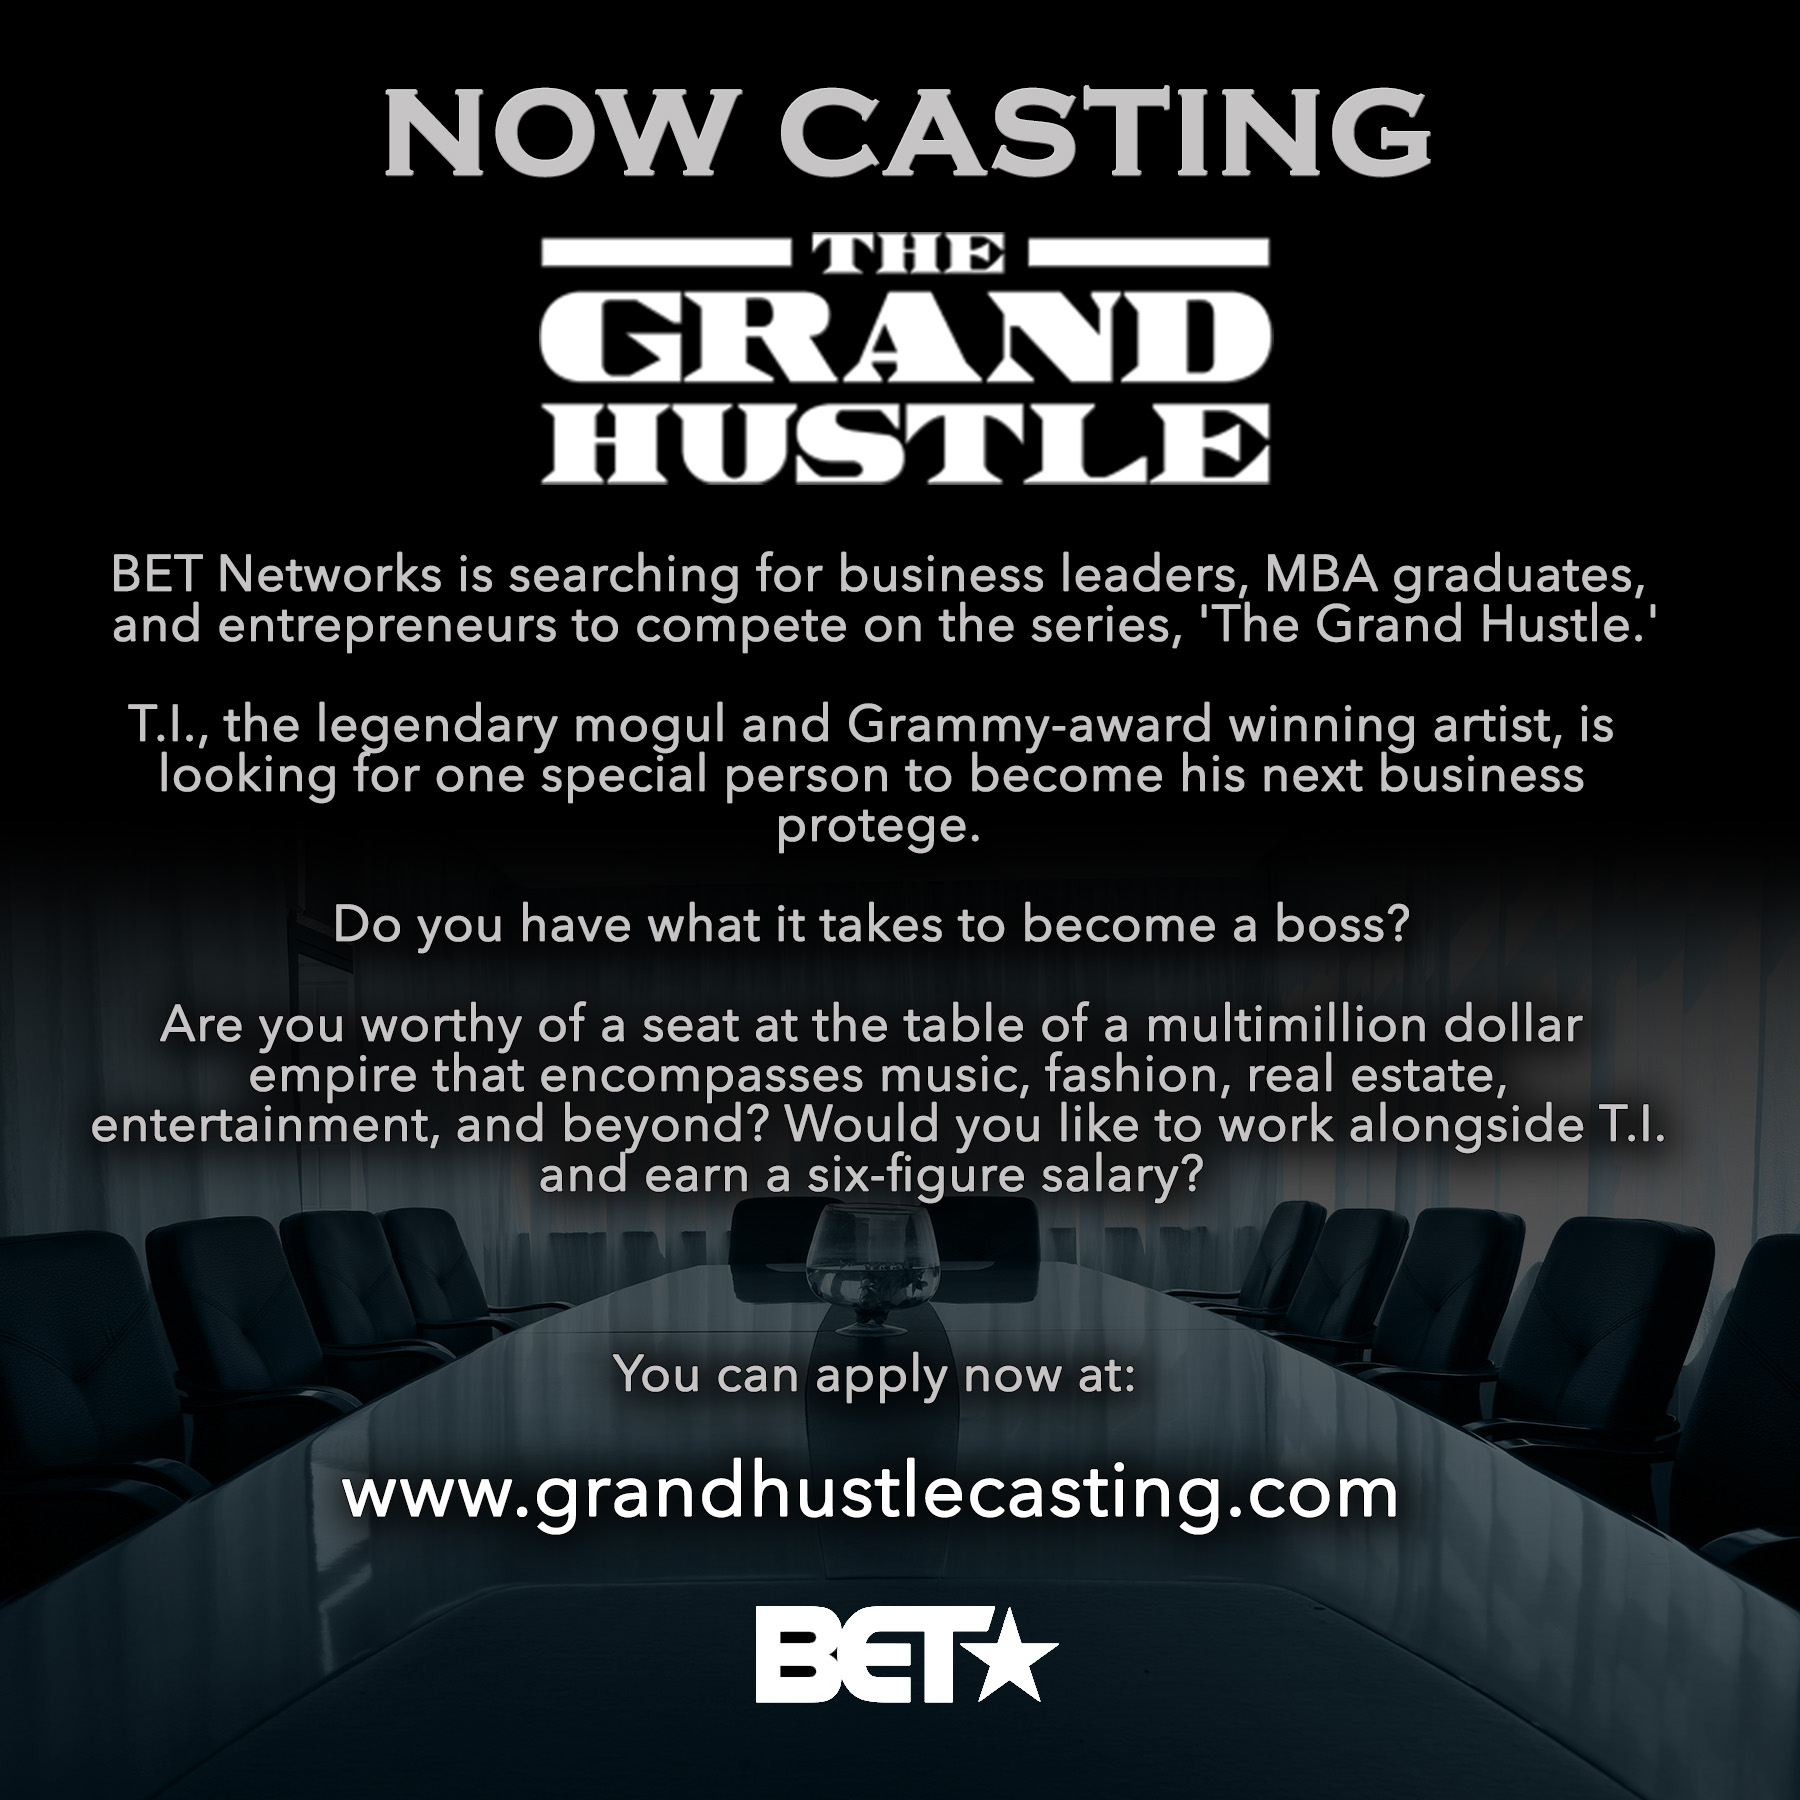 The Grand Hustle by T.I. and BET Television